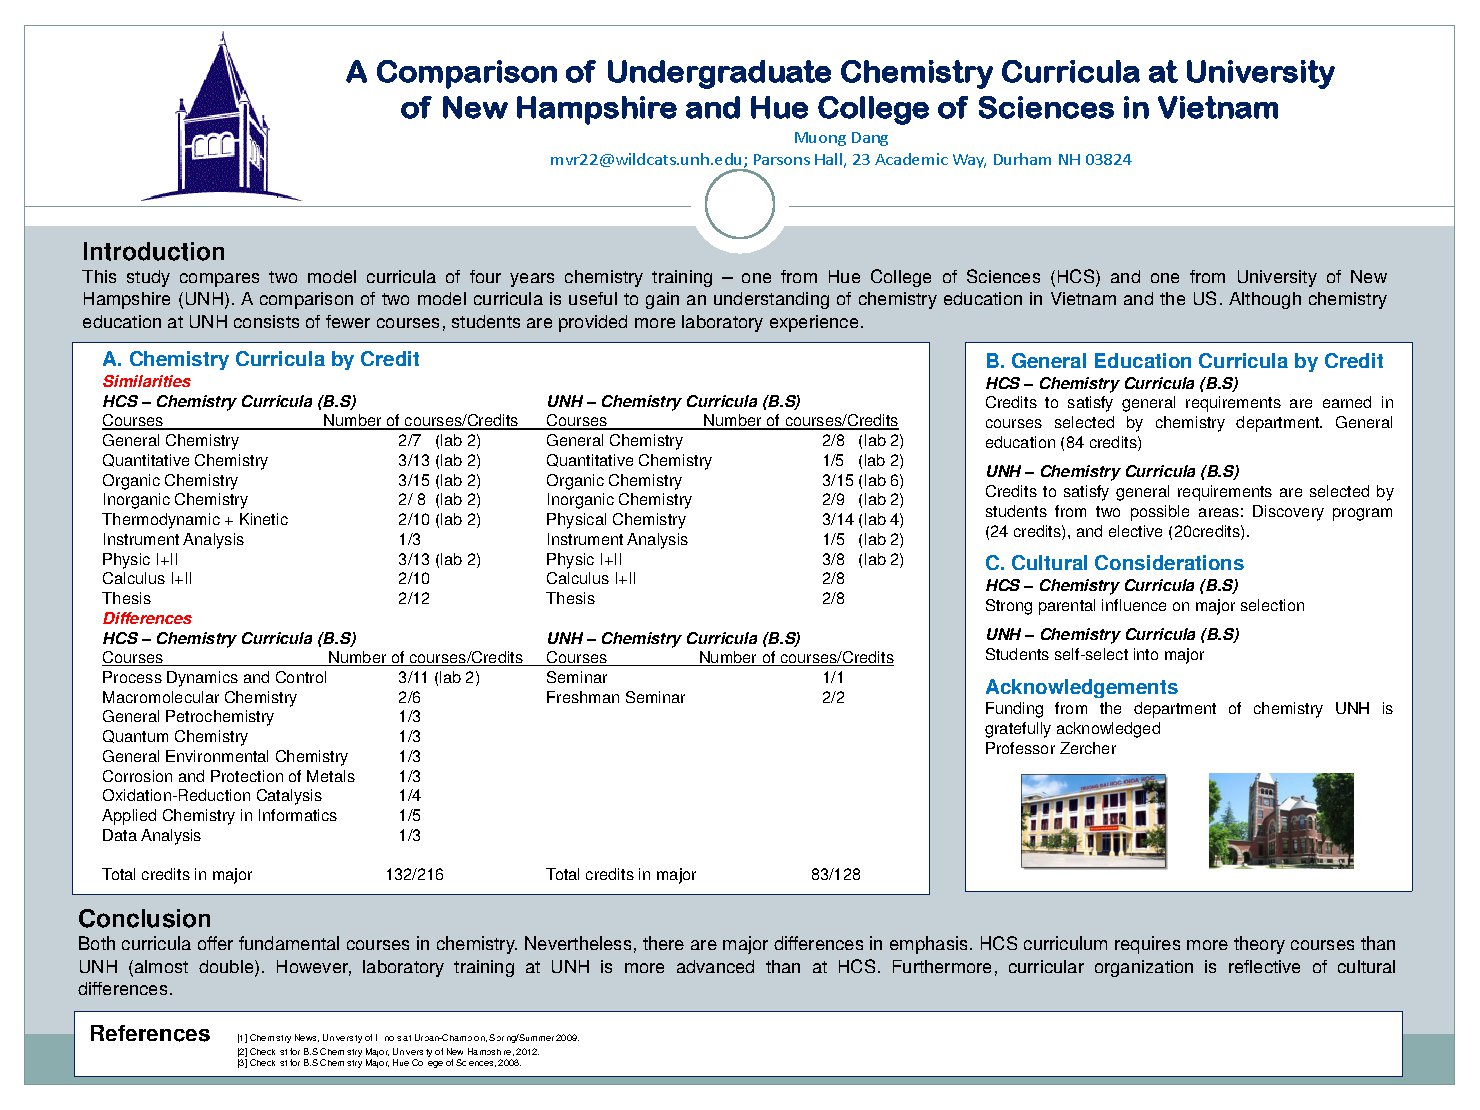 A Comparision Of Undergraduate Chemistry Currila At Unh And Hcs by dangmuong12